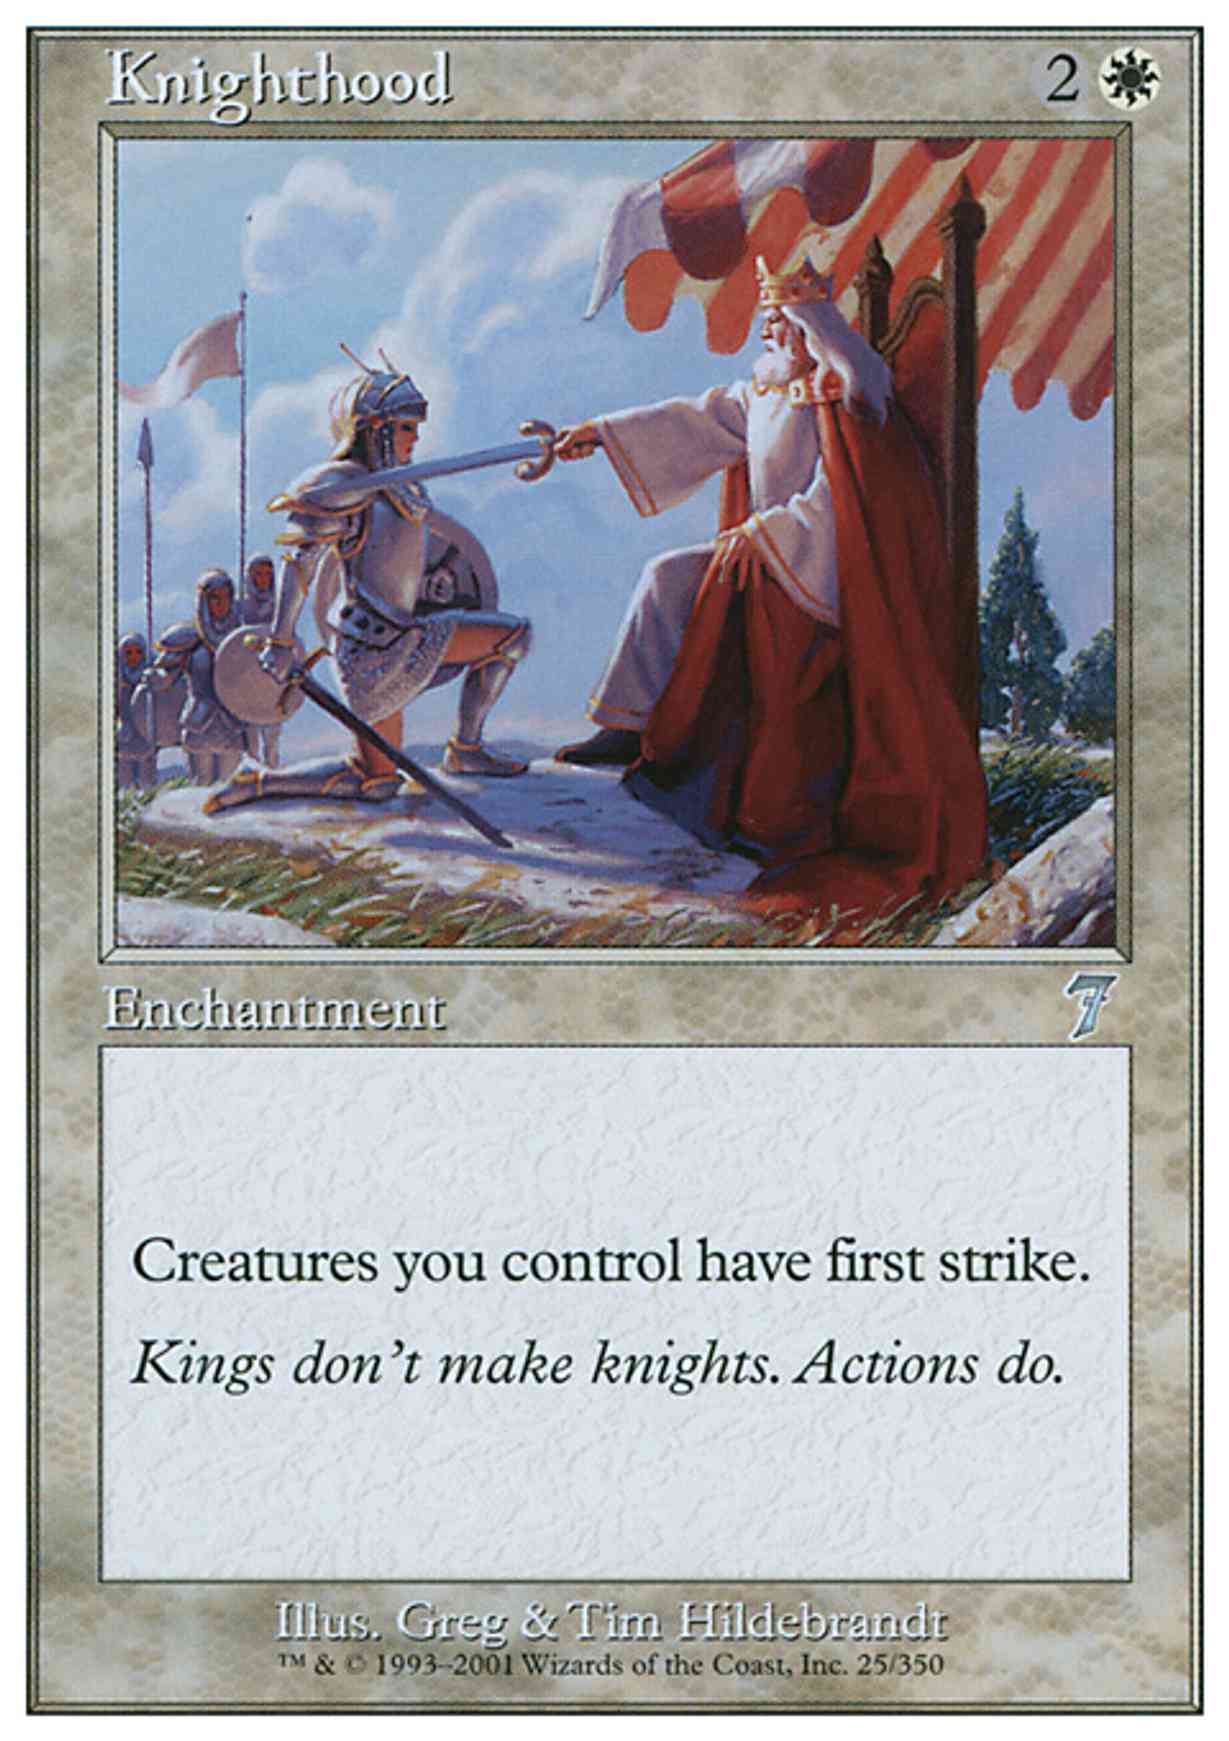 Knighthood magic card front